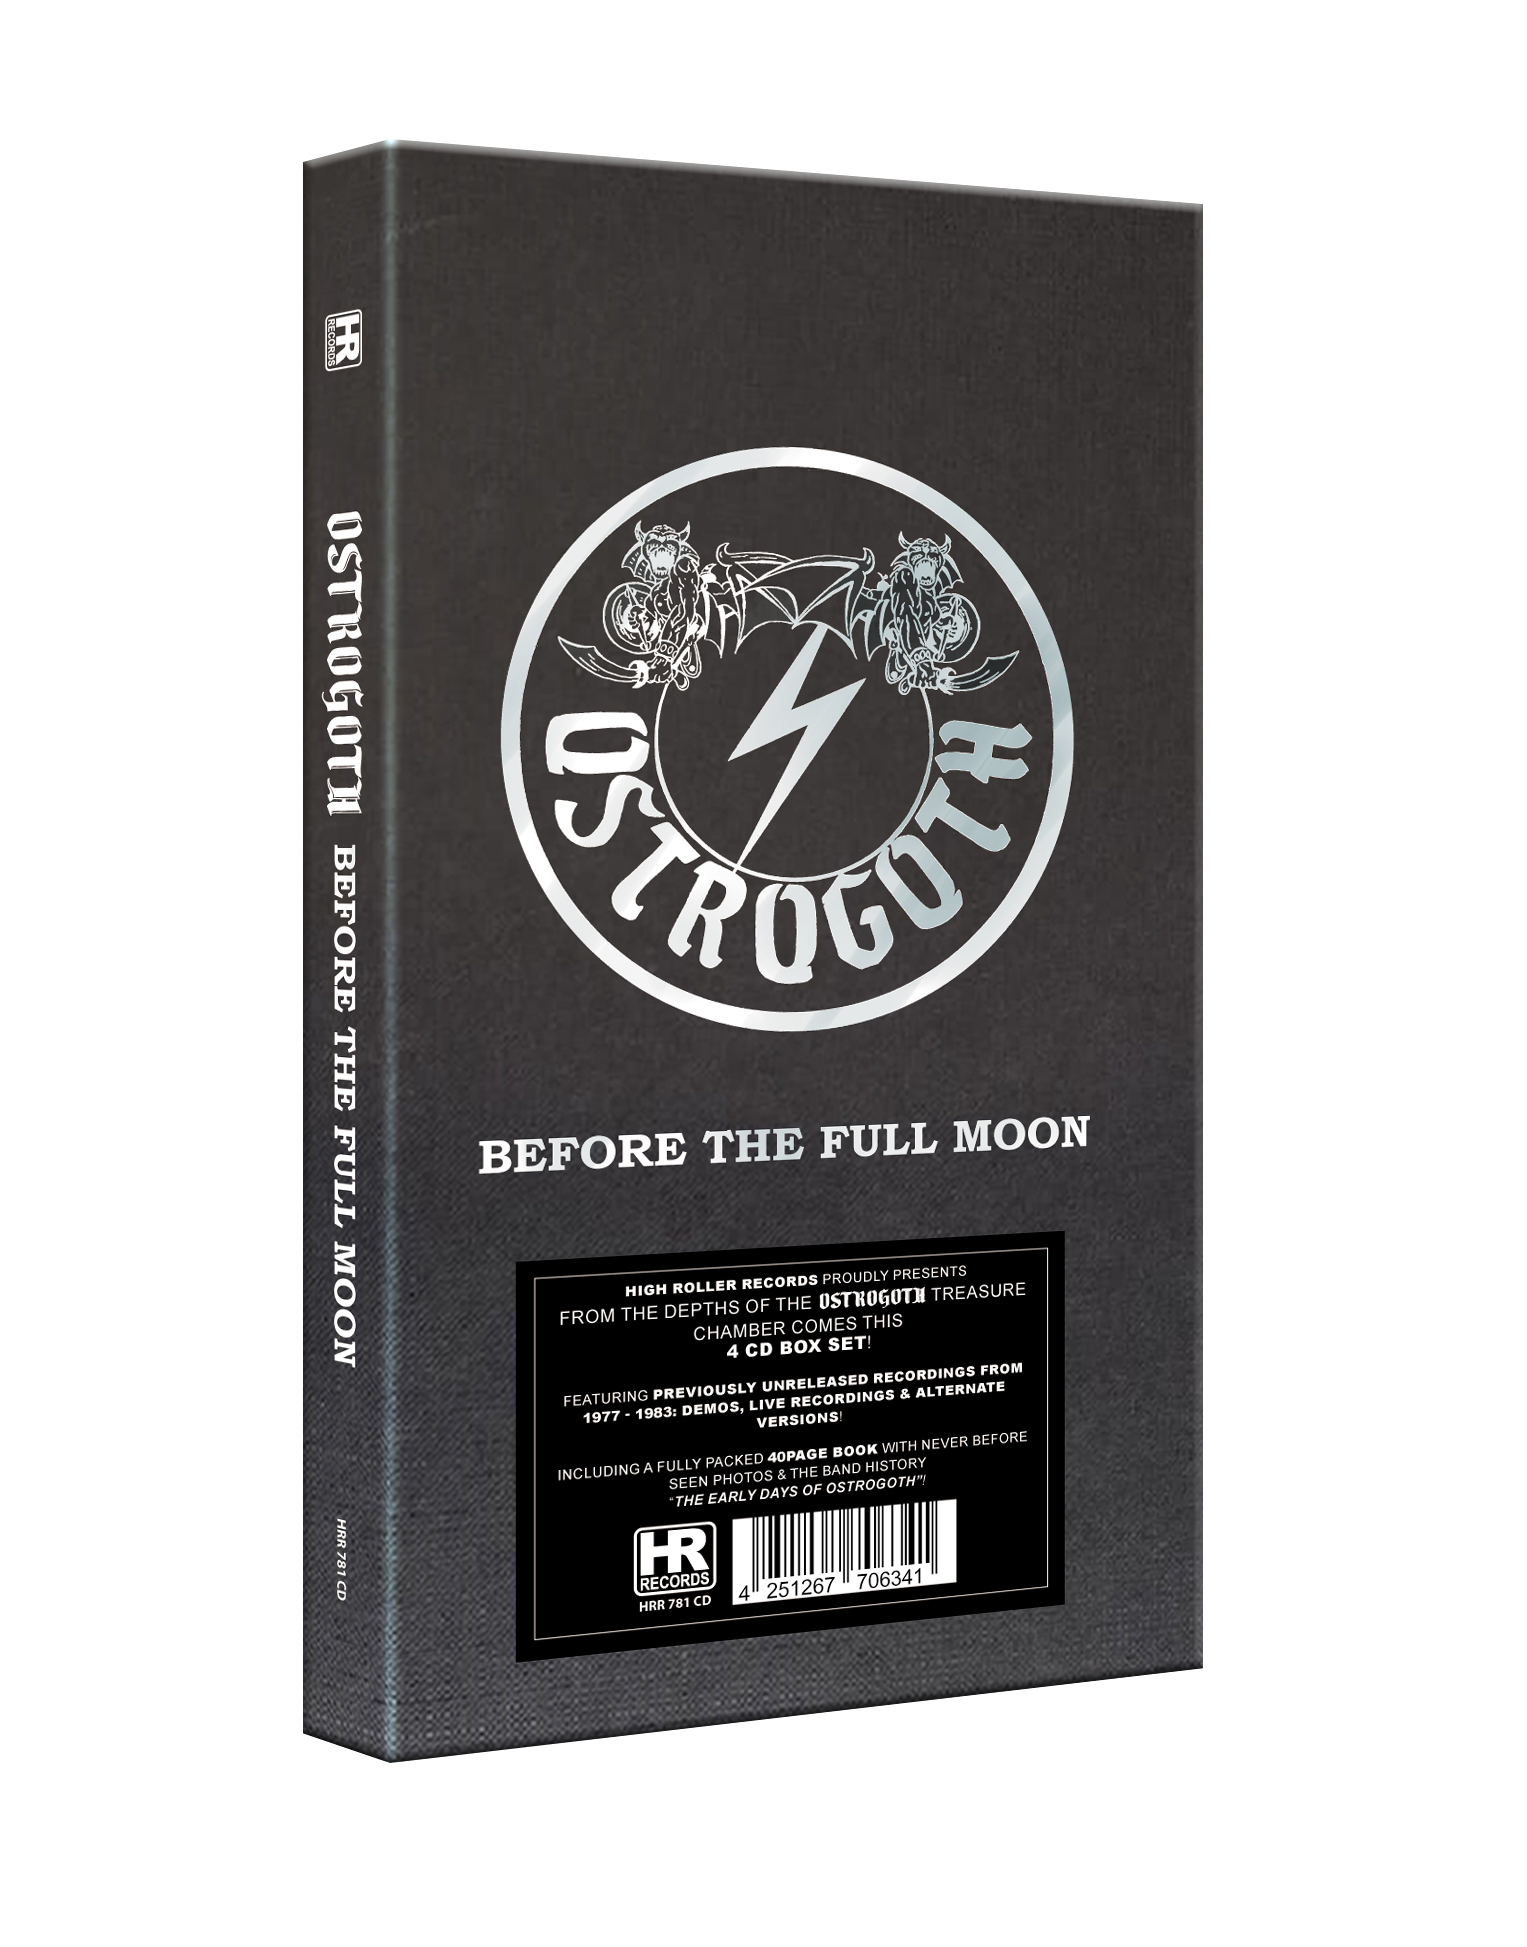 OSTROGOTH - Before the Full Moon  CD BOOK